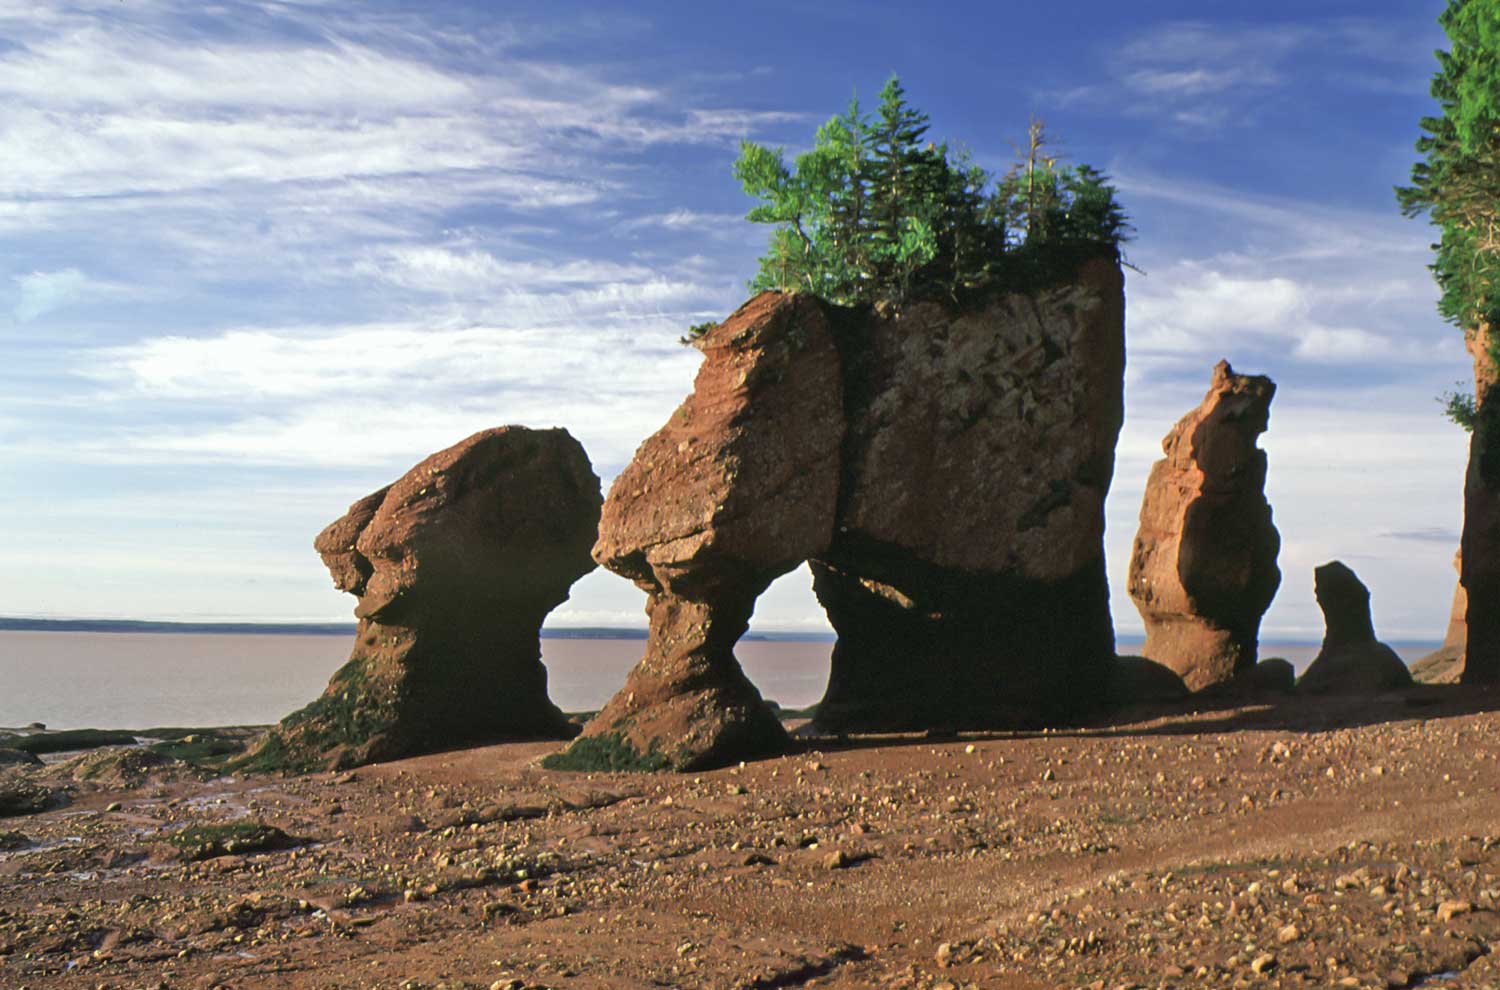 Low tide at the Hopewell Rocks at Hopewell Cape, New Brunswick